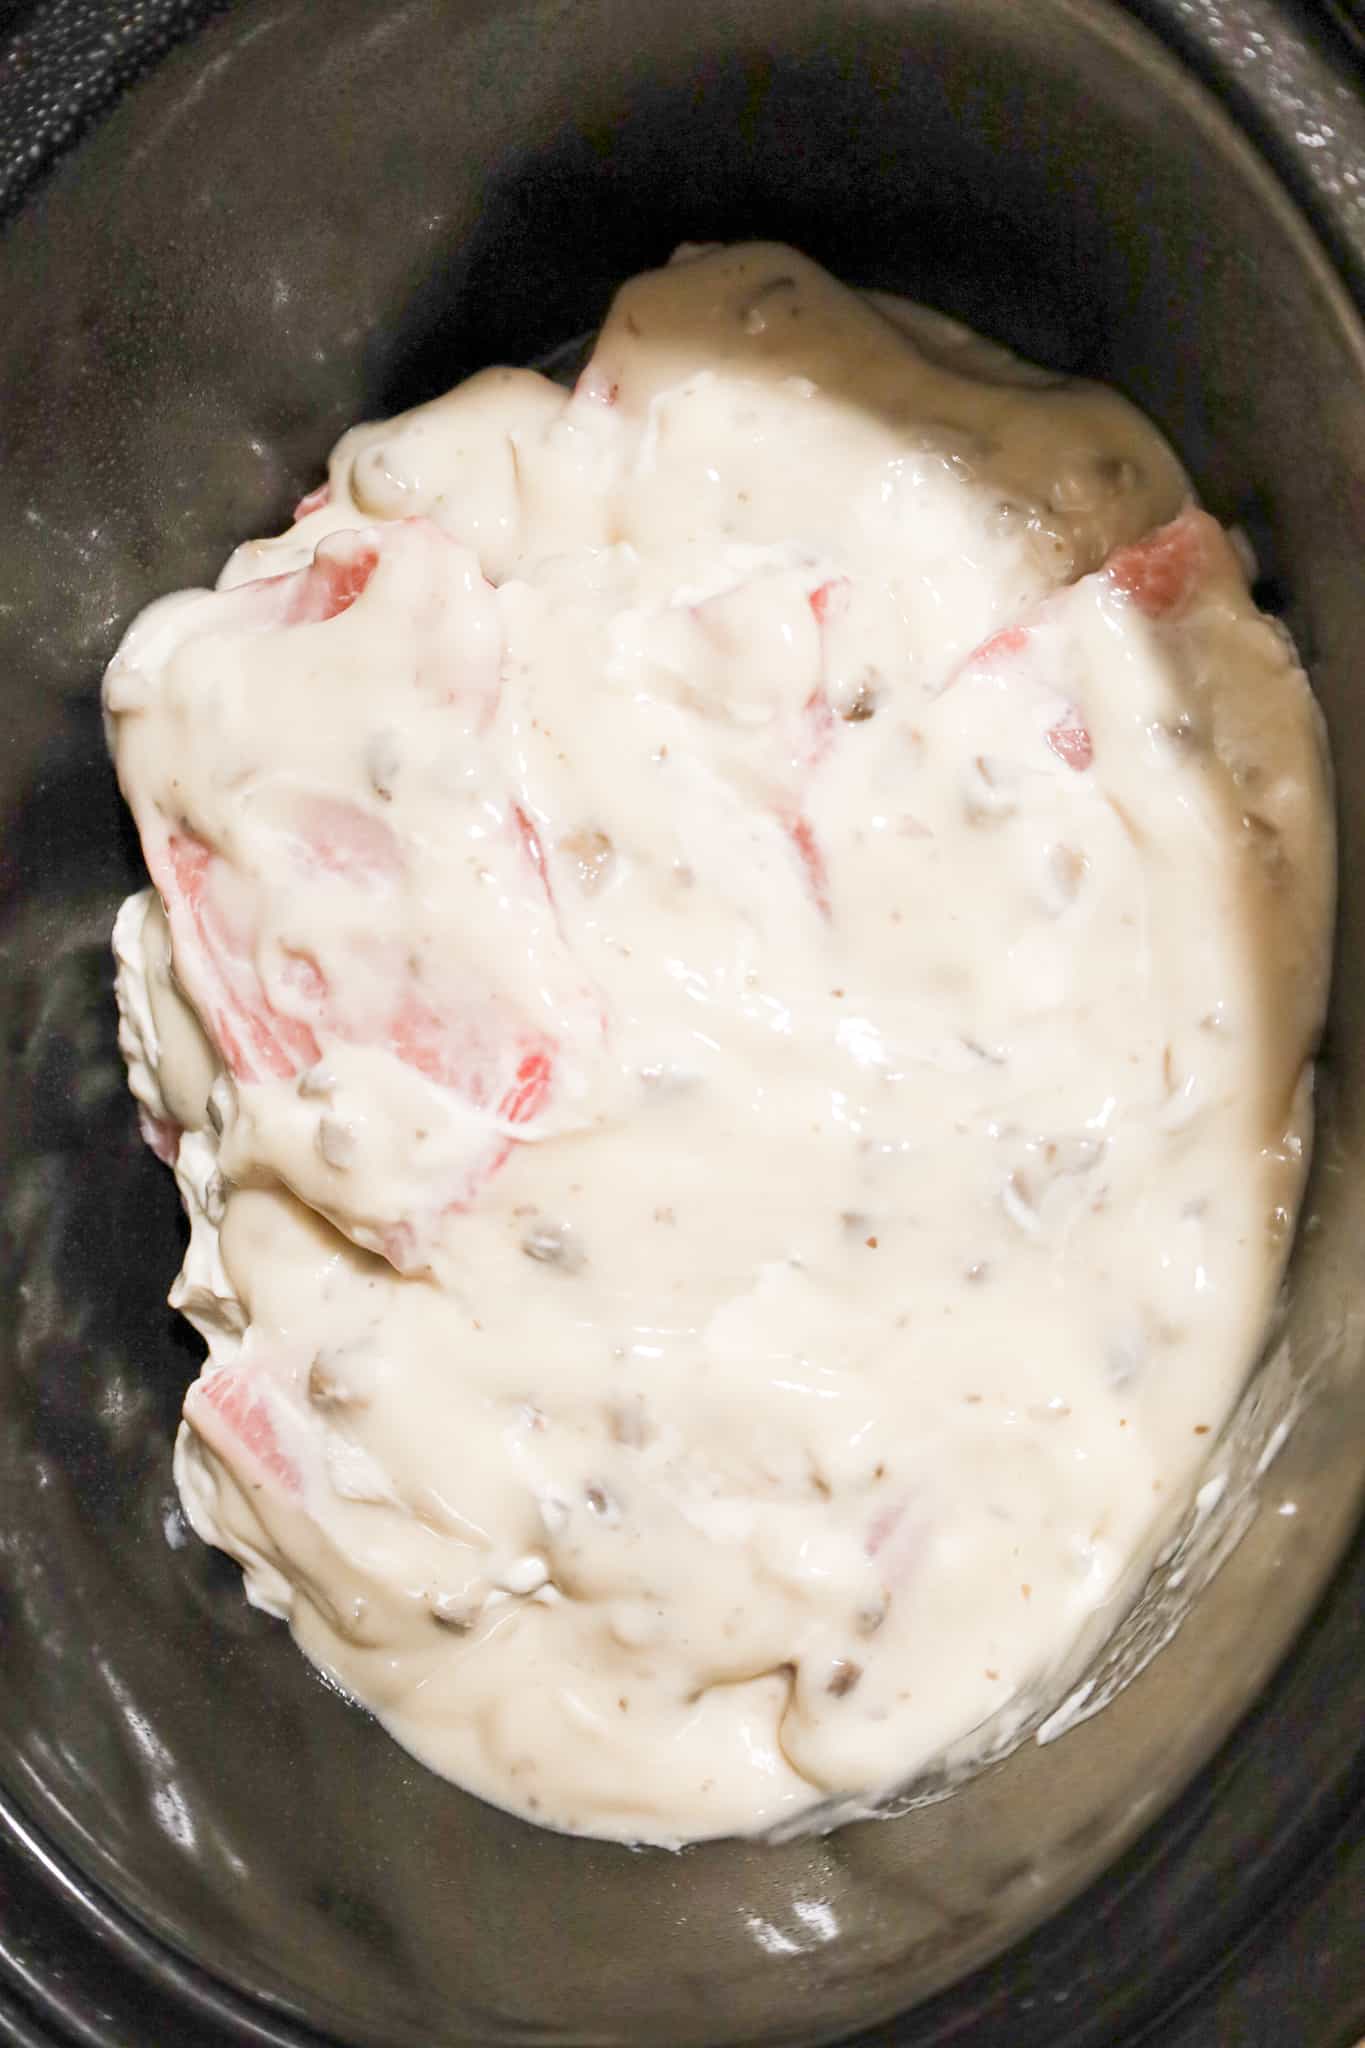 condensed cream of mushroom soup on top of raw pork chops in a crock pot